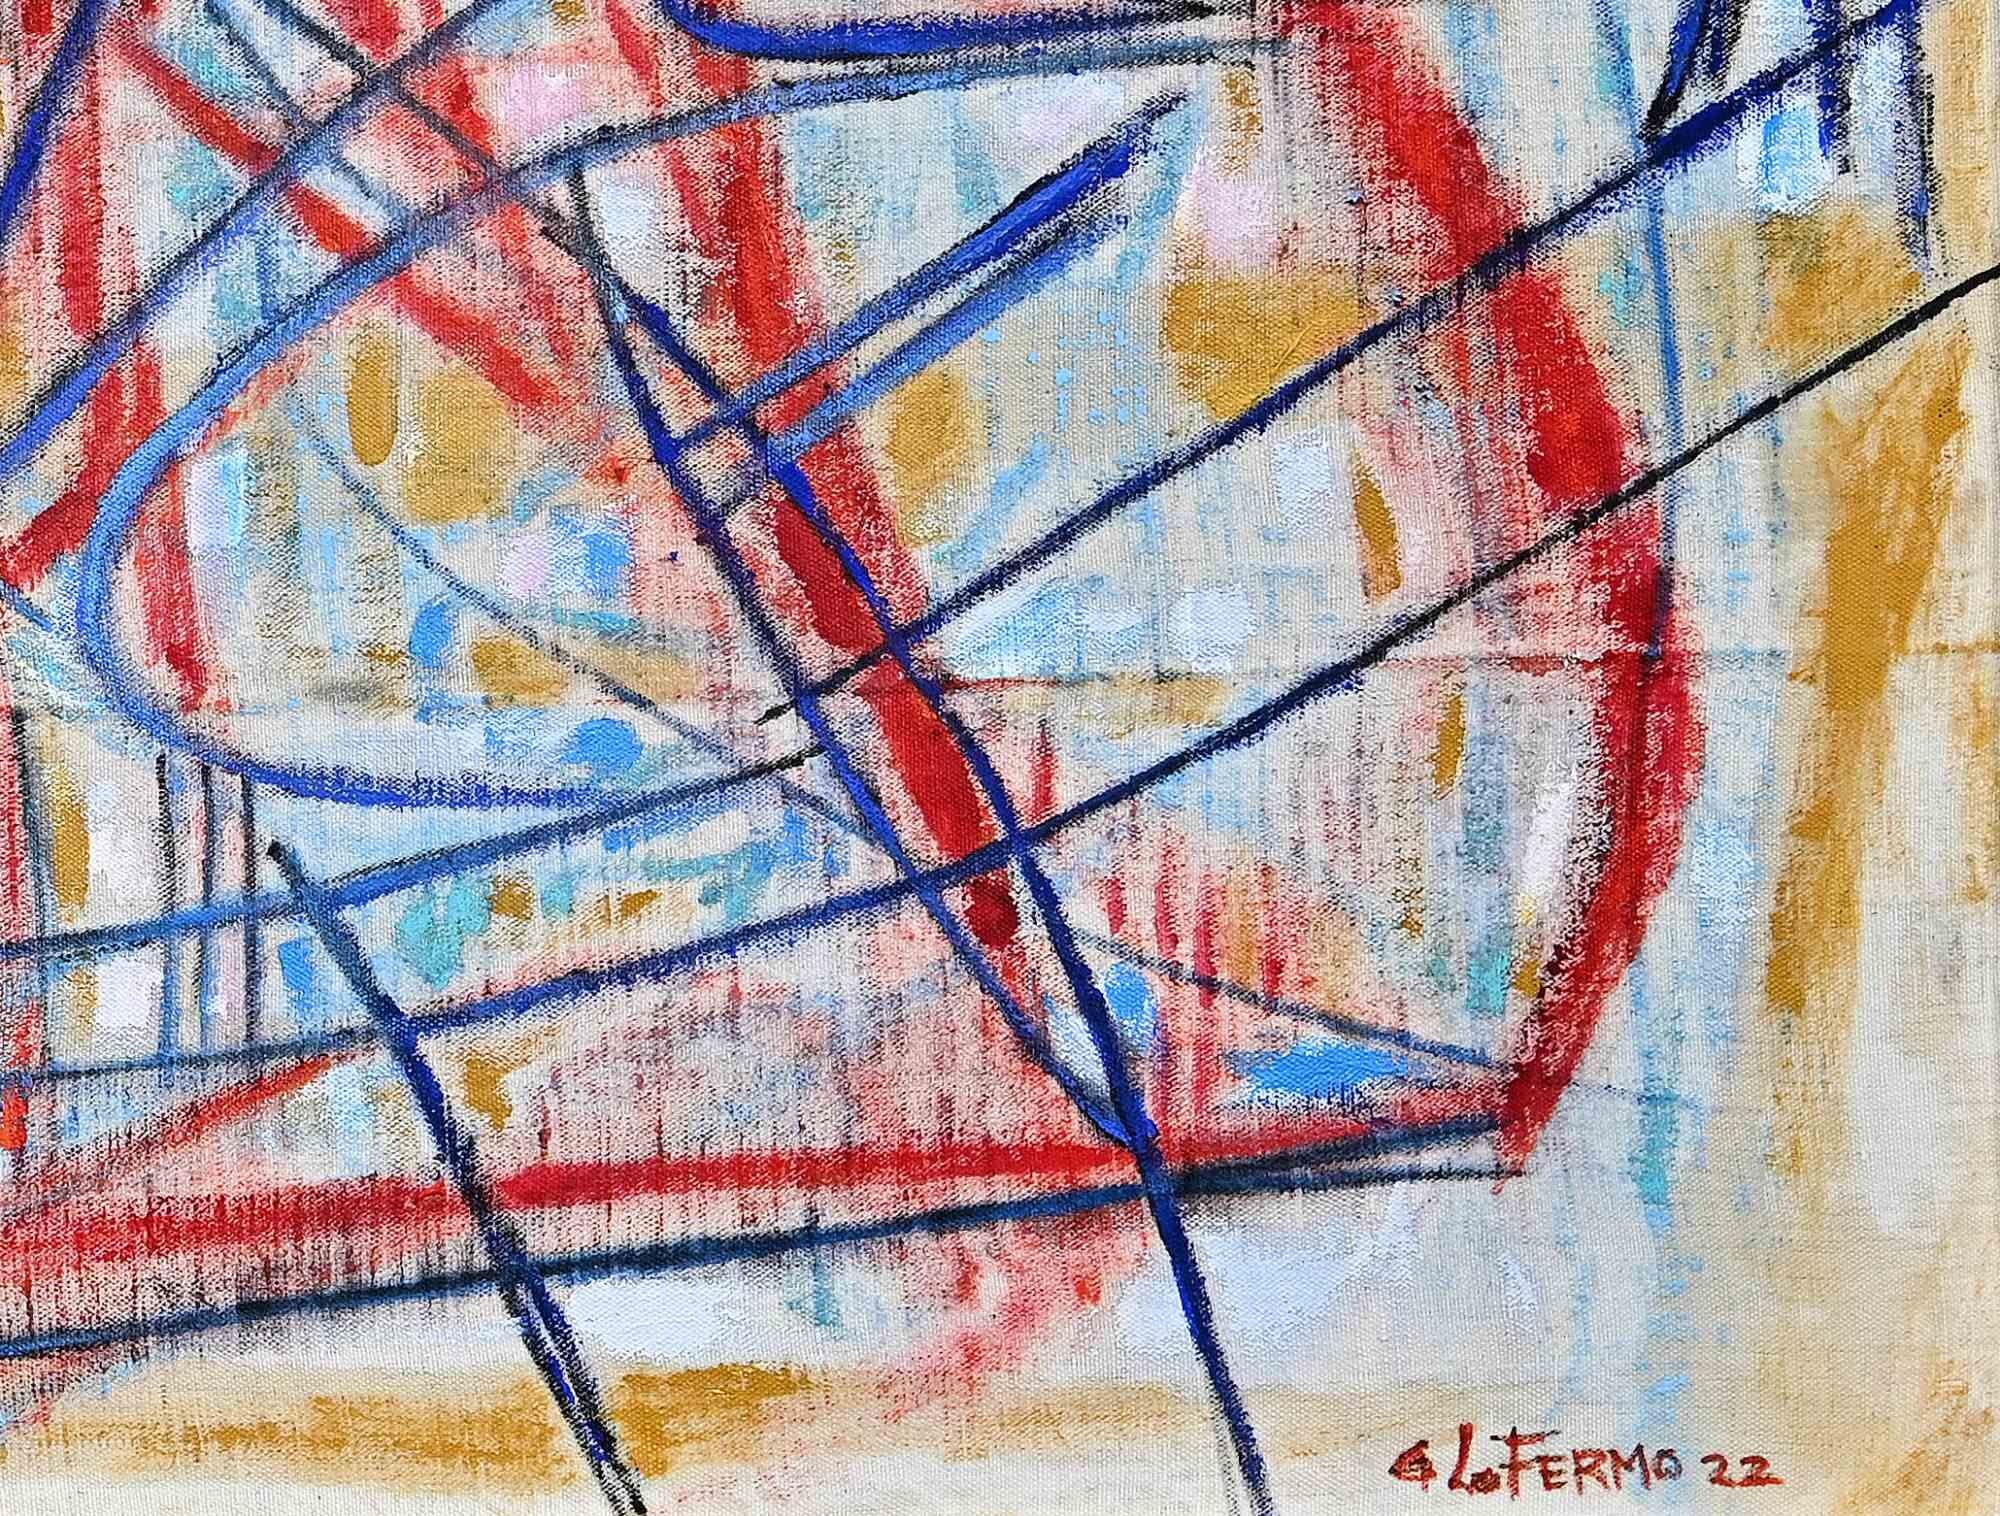 Abtract Expression - Oil On Canvas by Giorgio Lo Fermo - 2022 For Sale 1